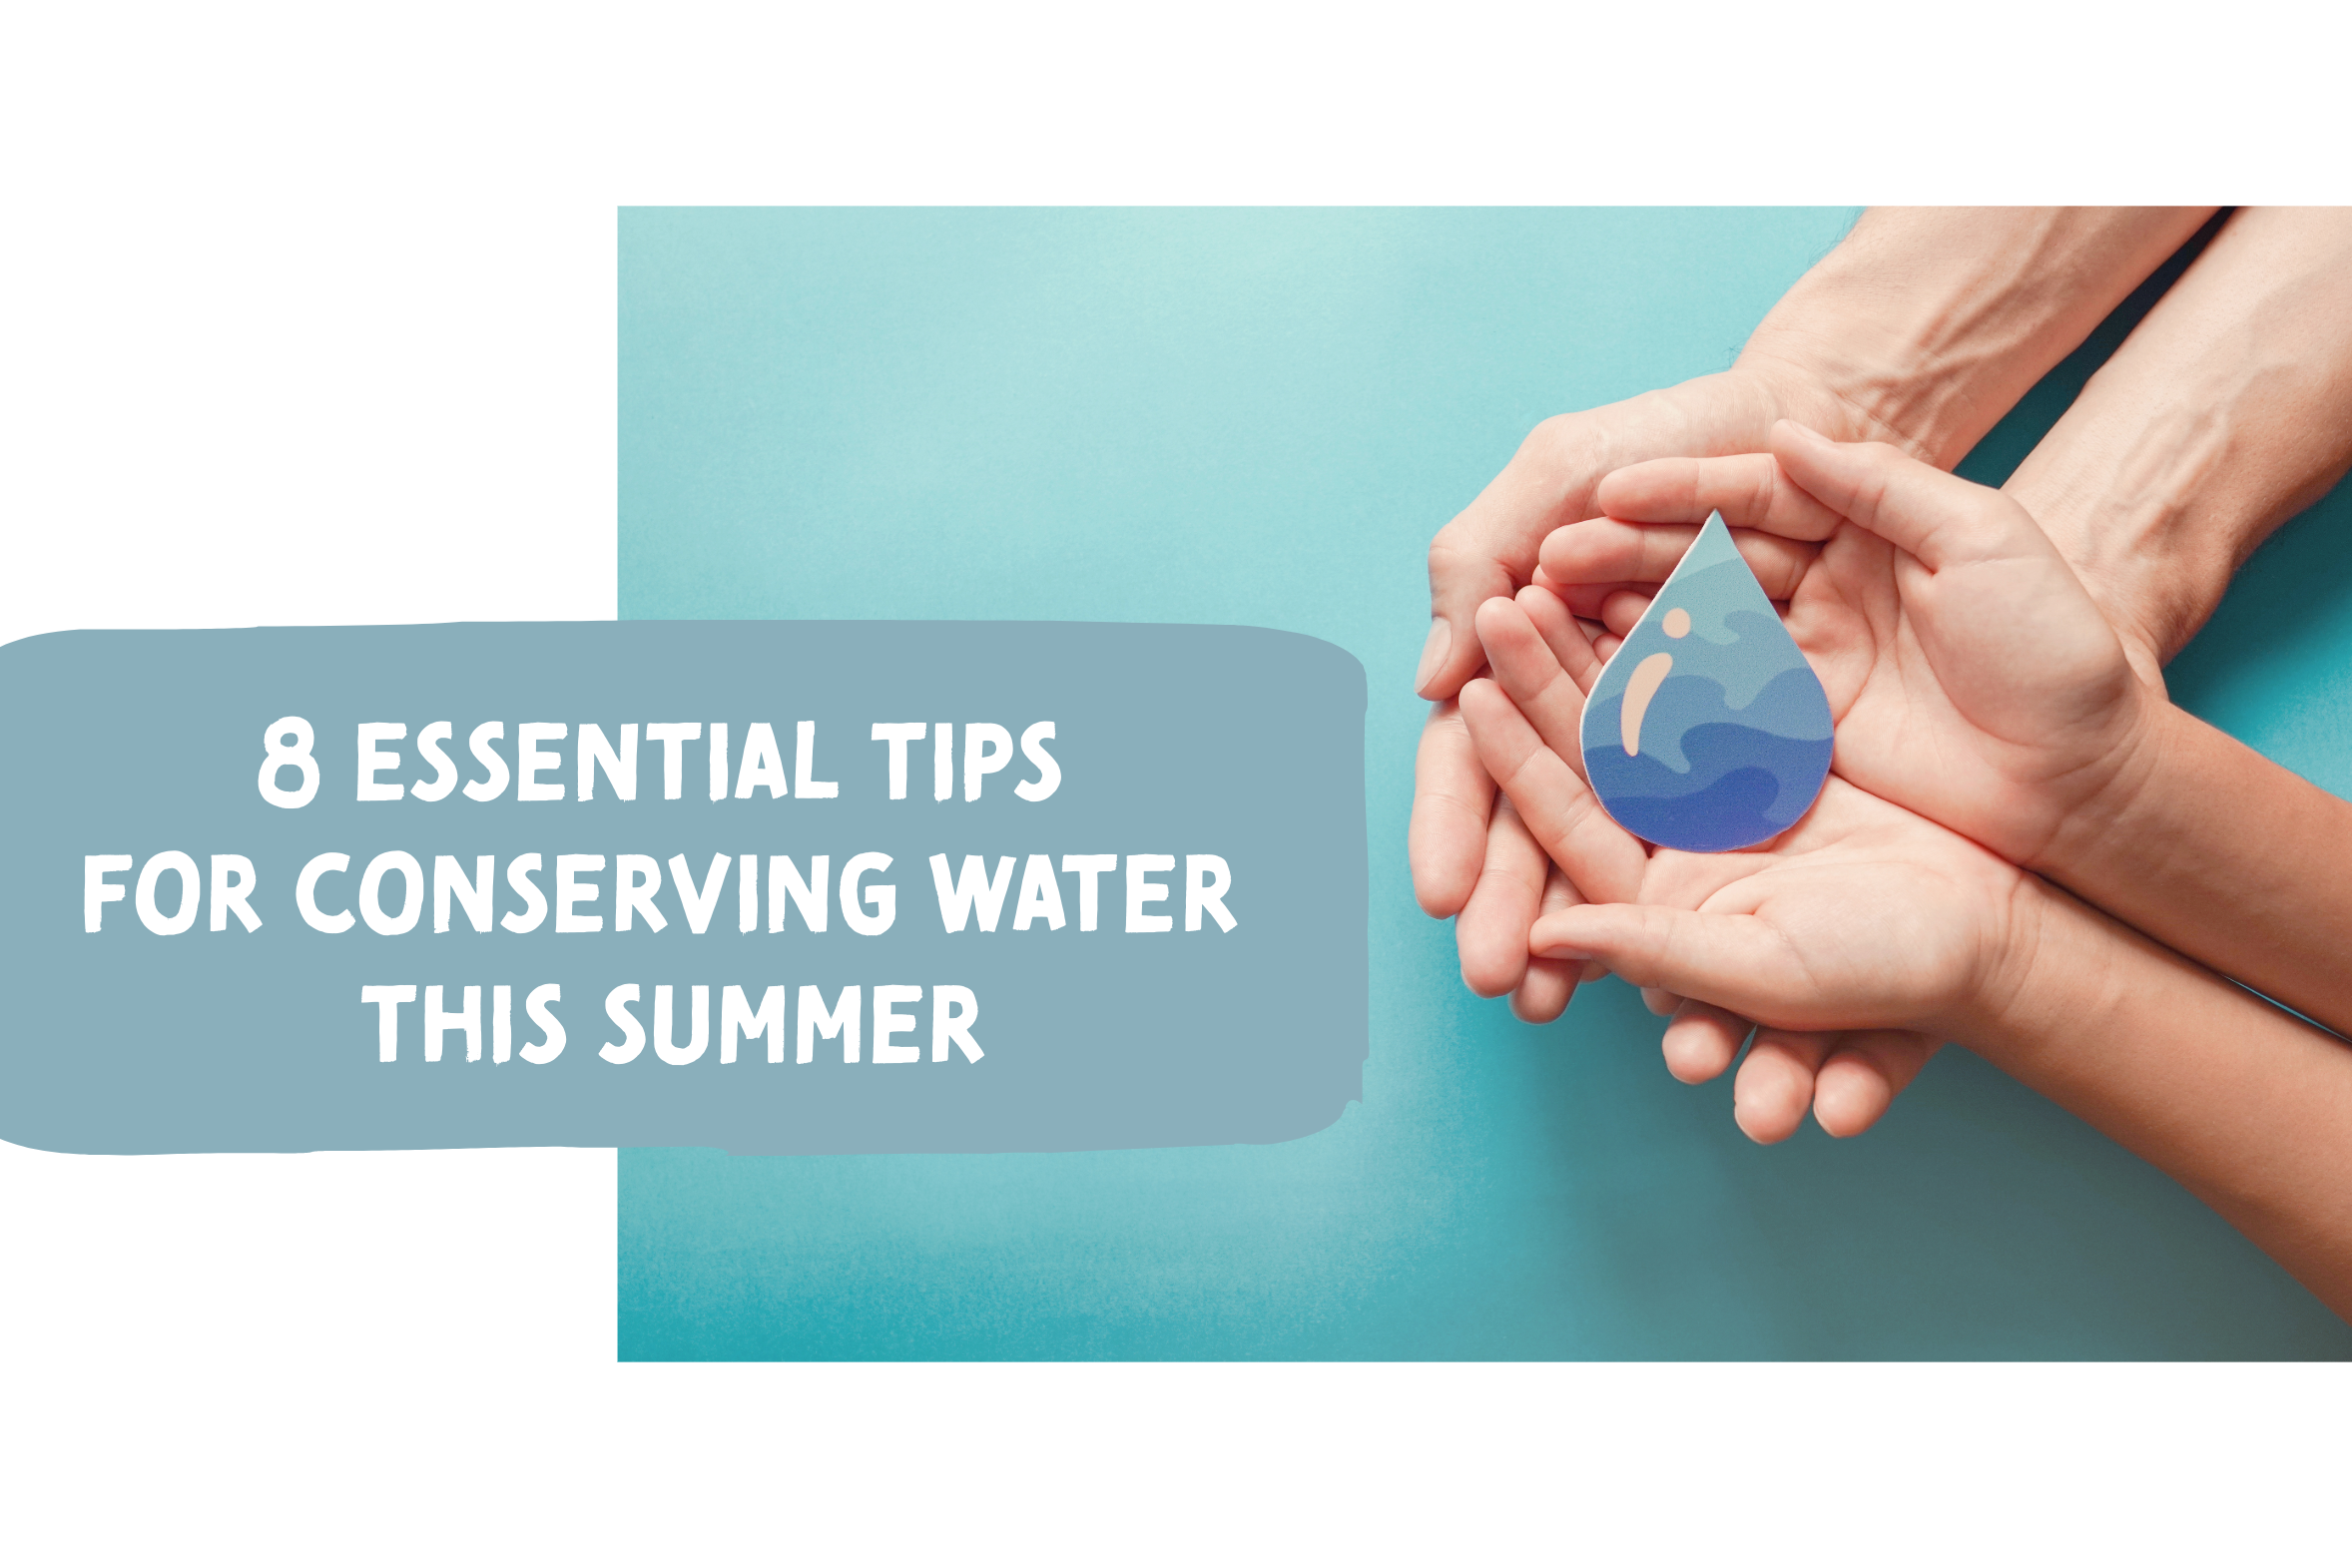 Blog on how to conserve water for the summer.